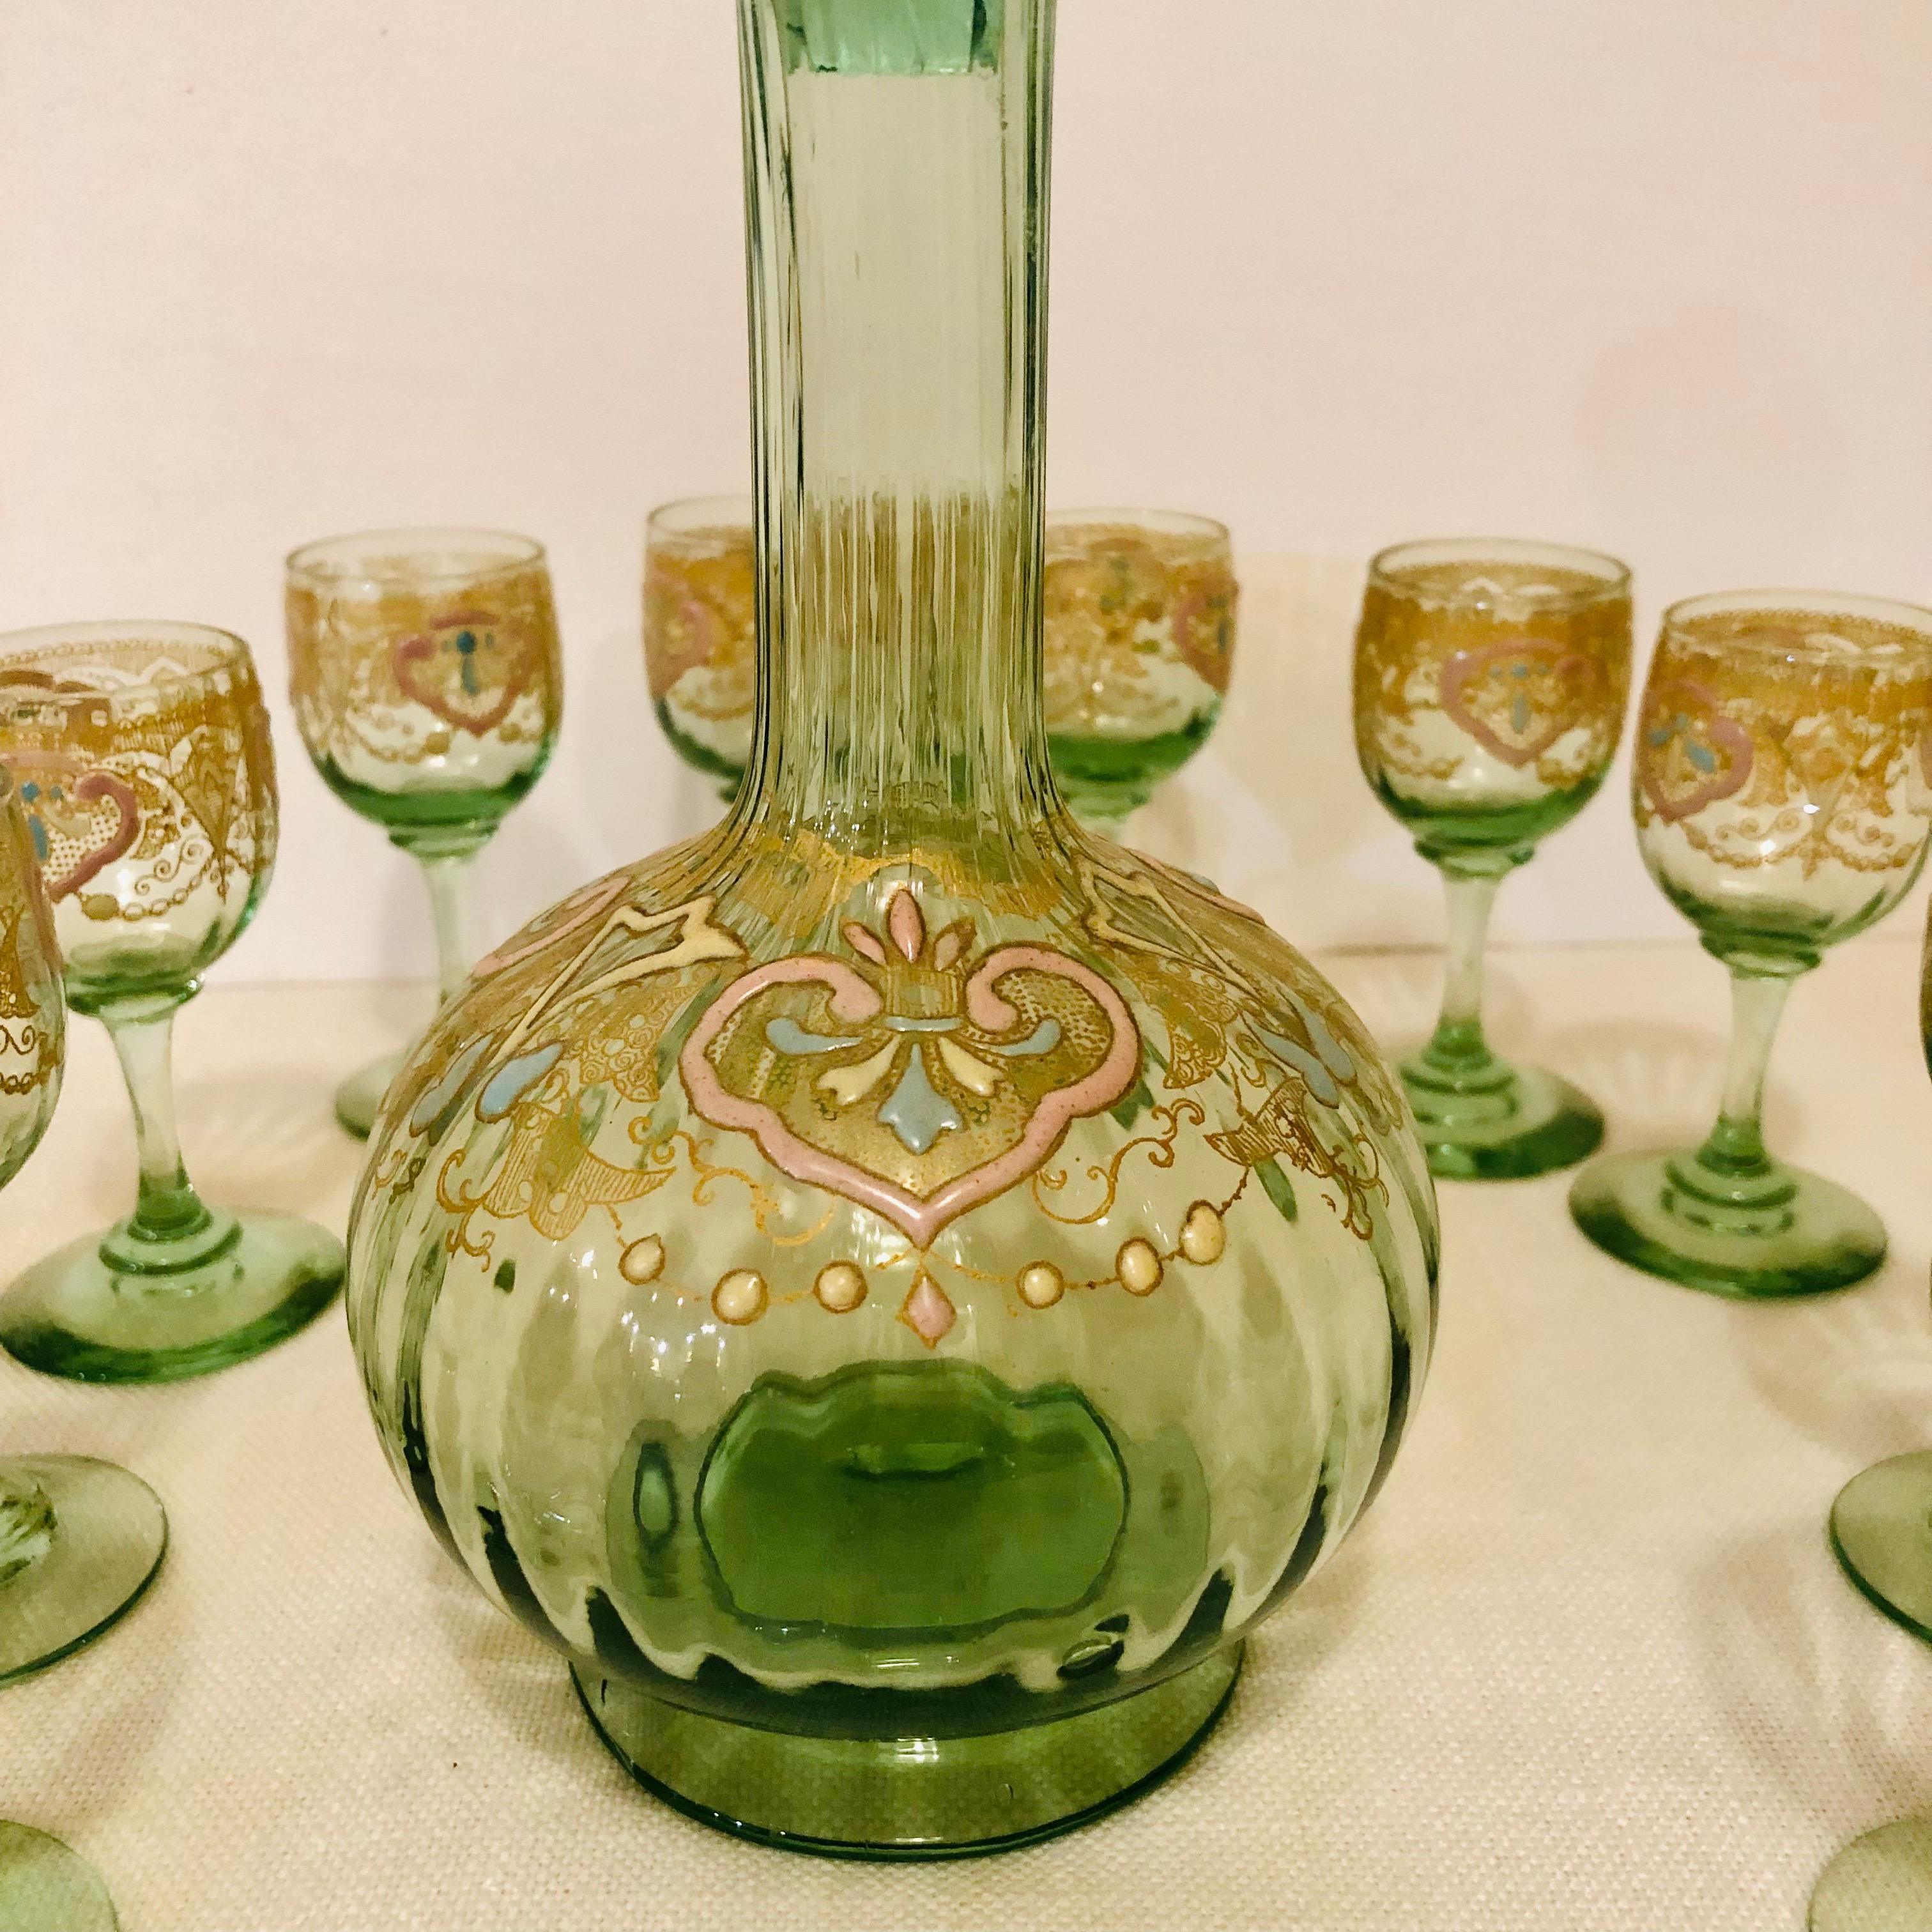 Italian Venetian Decanter With Ten Venetian Cordial Glasses With Colorful Enamel Accents